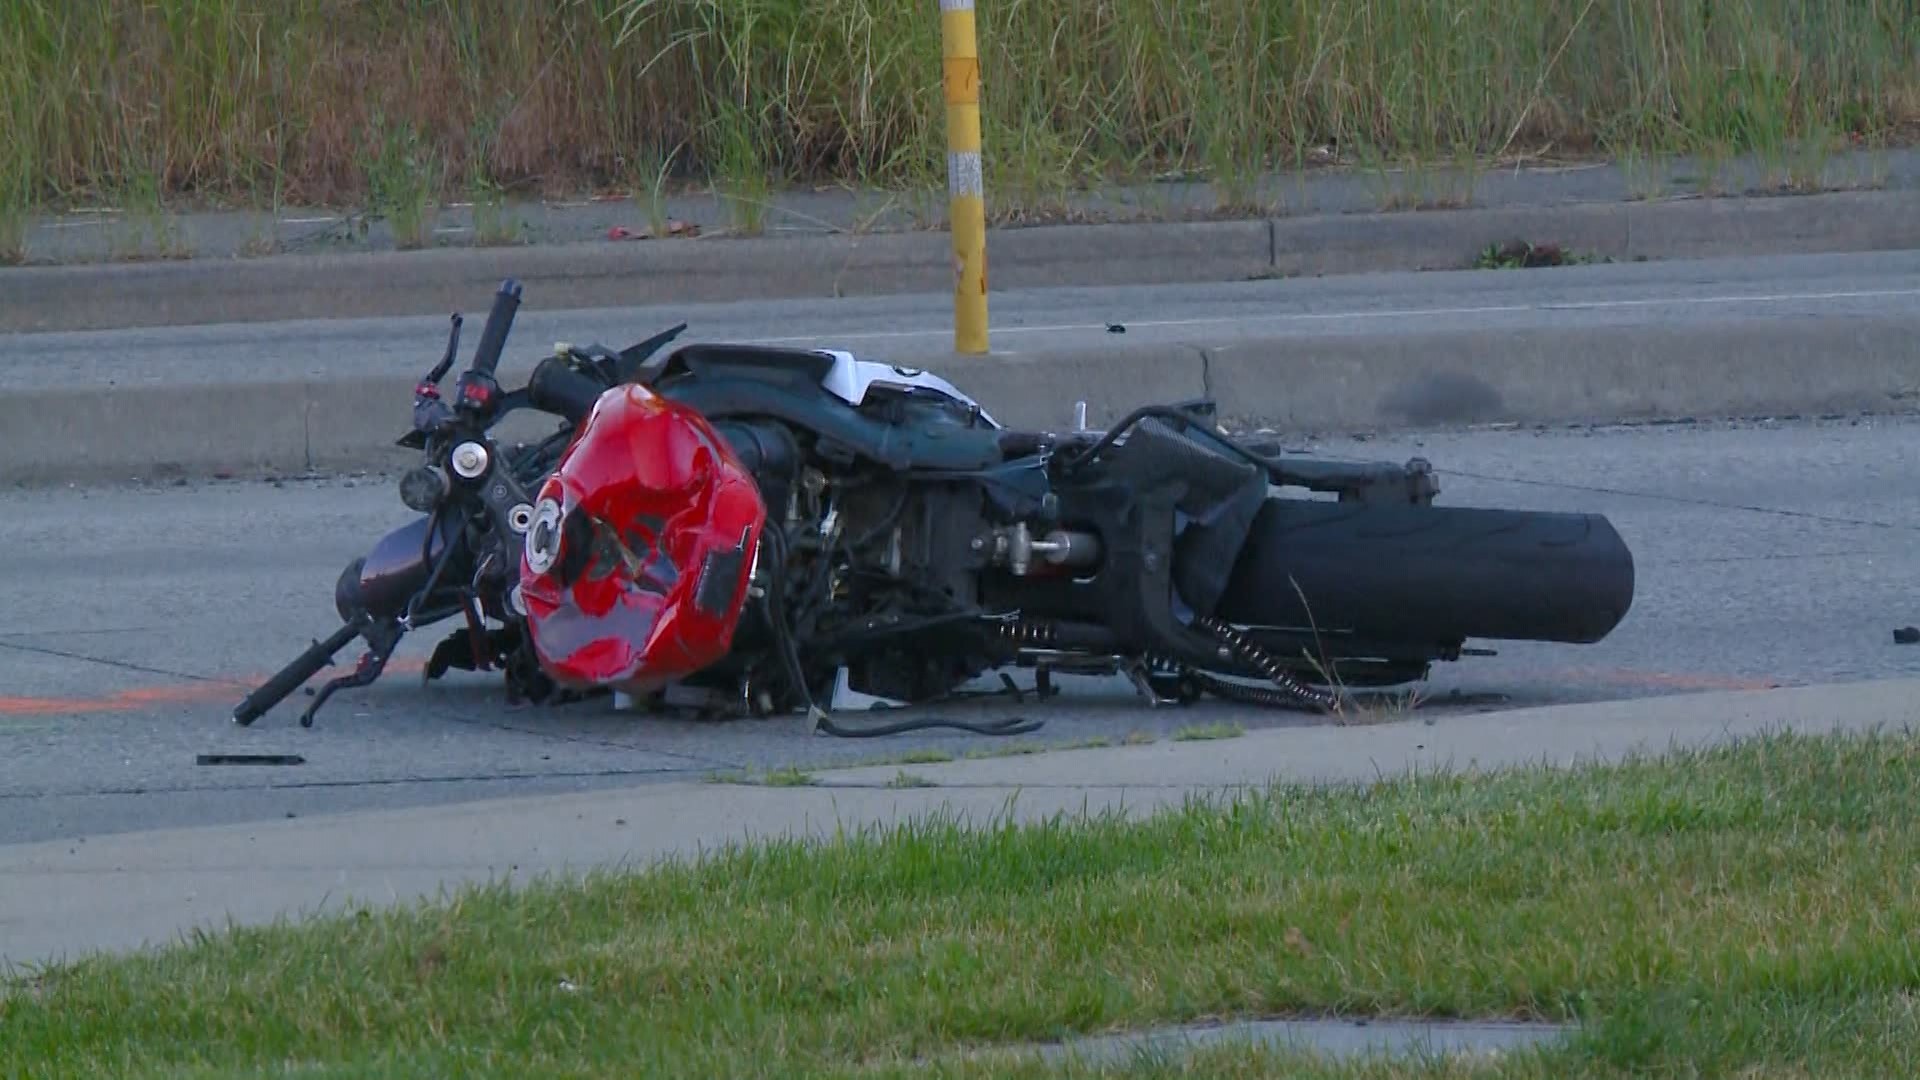 The motorcycle crashed into another car overnight after fleeing from a traffic stop.